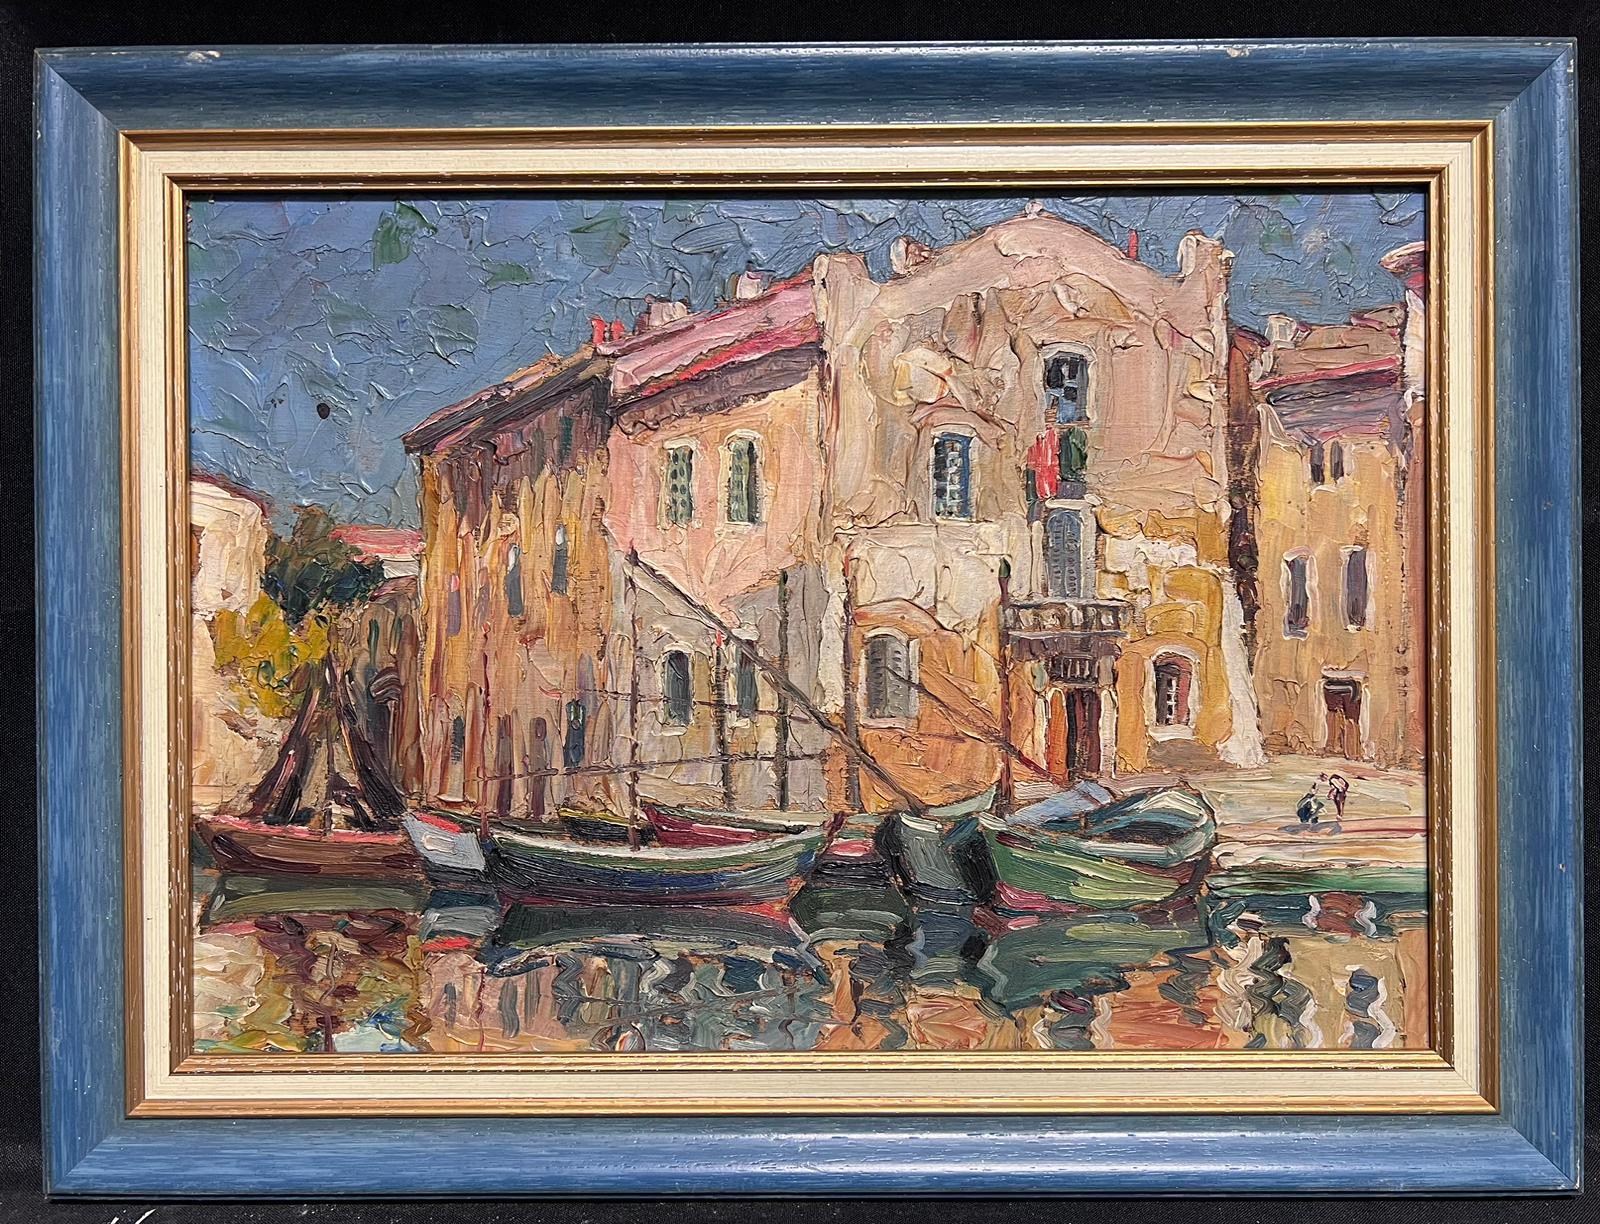 St Tropez Harbor Boats Moored Sleep Sunny French Old Town 1950's Impressionist - Brown Landscape Painting by French Mid Century 